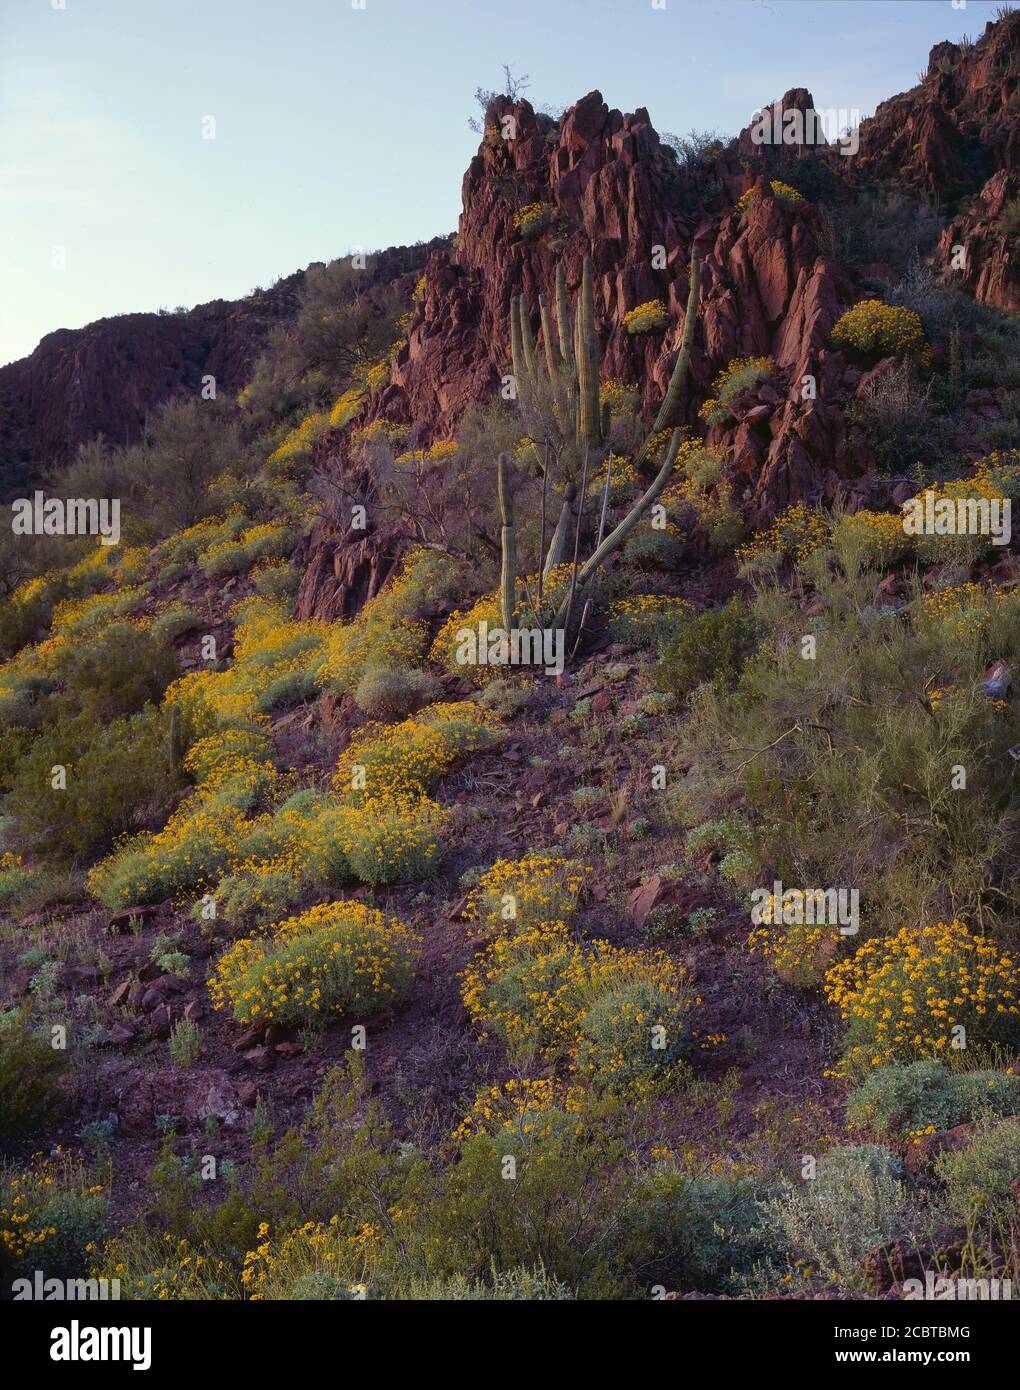 Organpipe Cactus National Monument  AZ / MAR The yellow blossoms of brittlebush contrast against  volcanic rock with organpipe cactus in dusk light Stock Photo